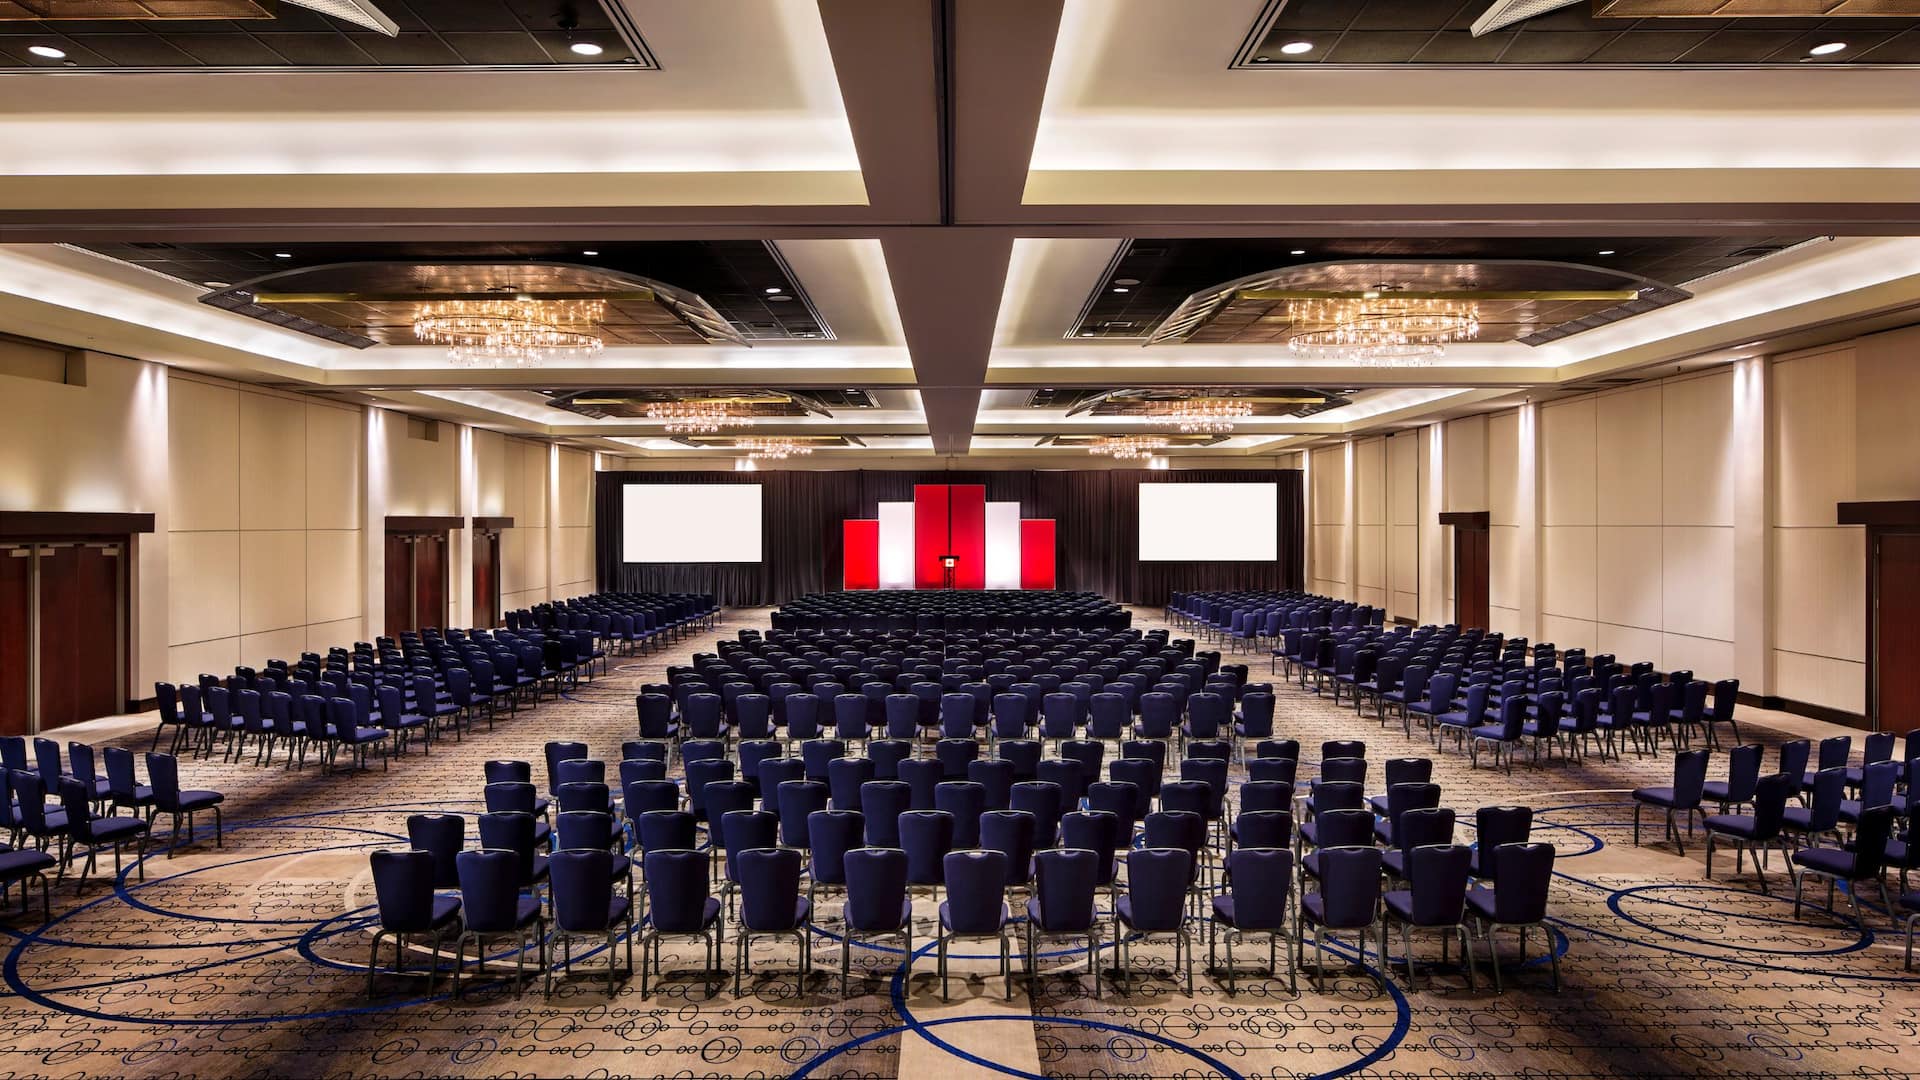 Large meeting venue at a hotel in Vancouver, Canada